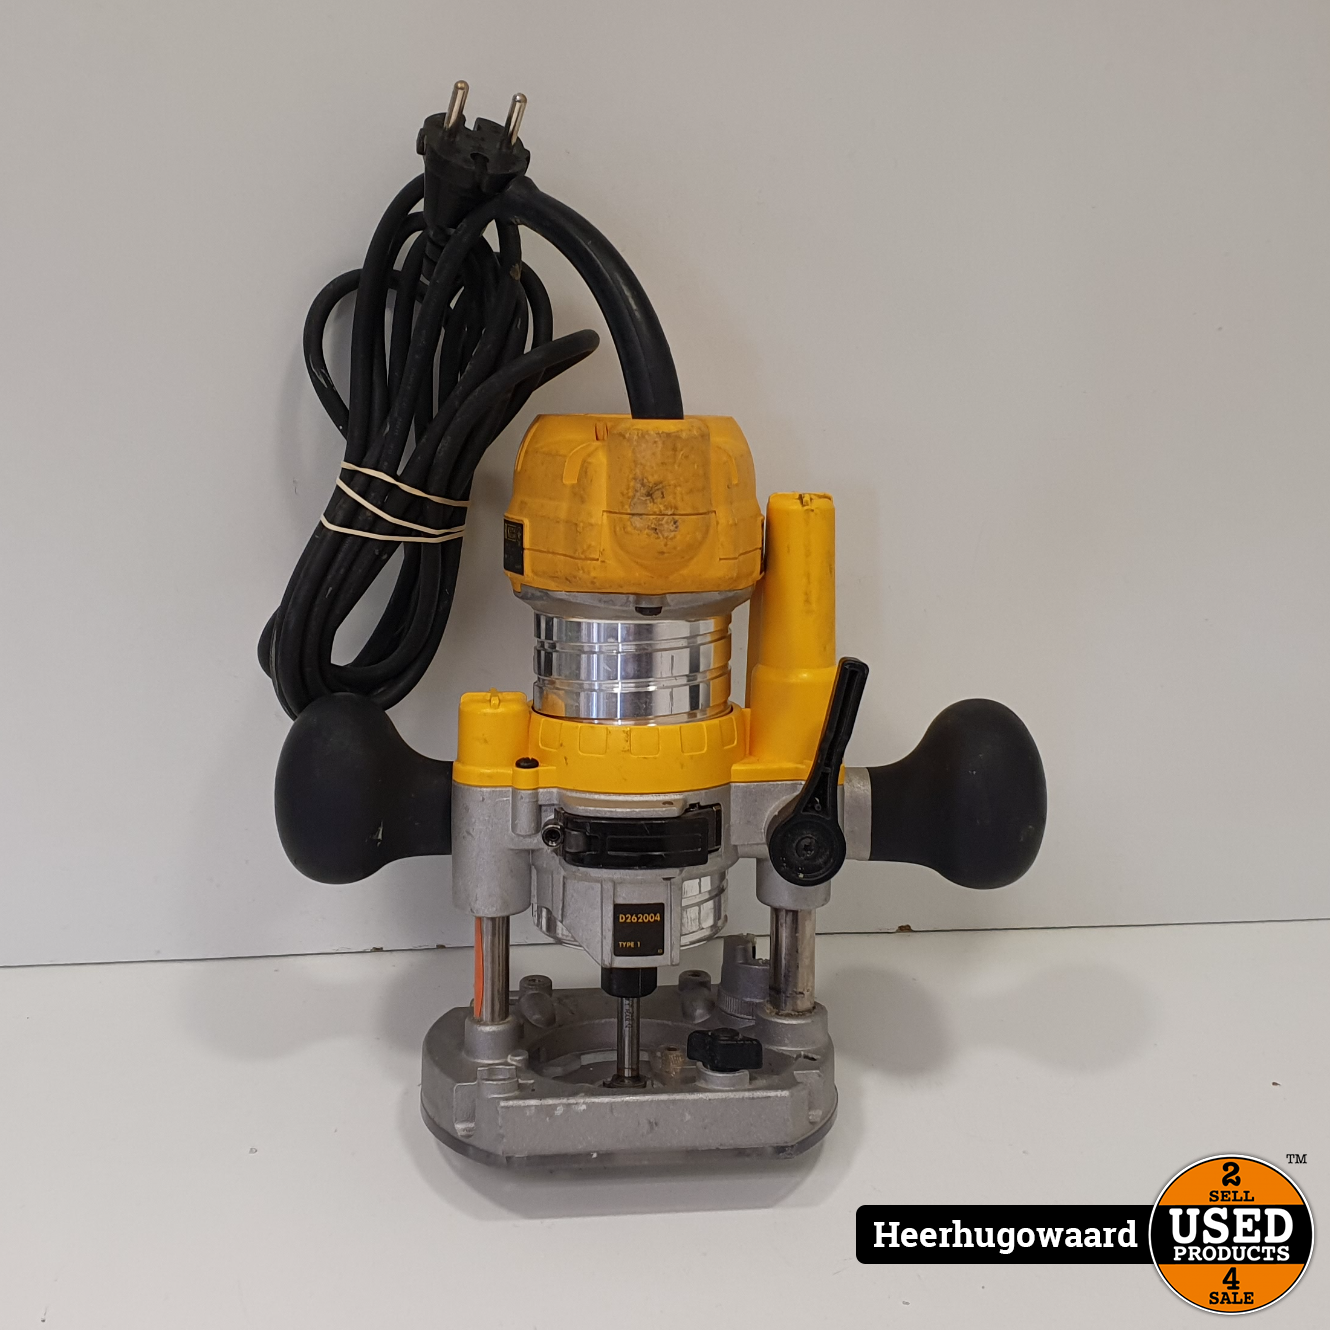 DeWalt D26204-QS Bovenfrees in Staat - Used Products